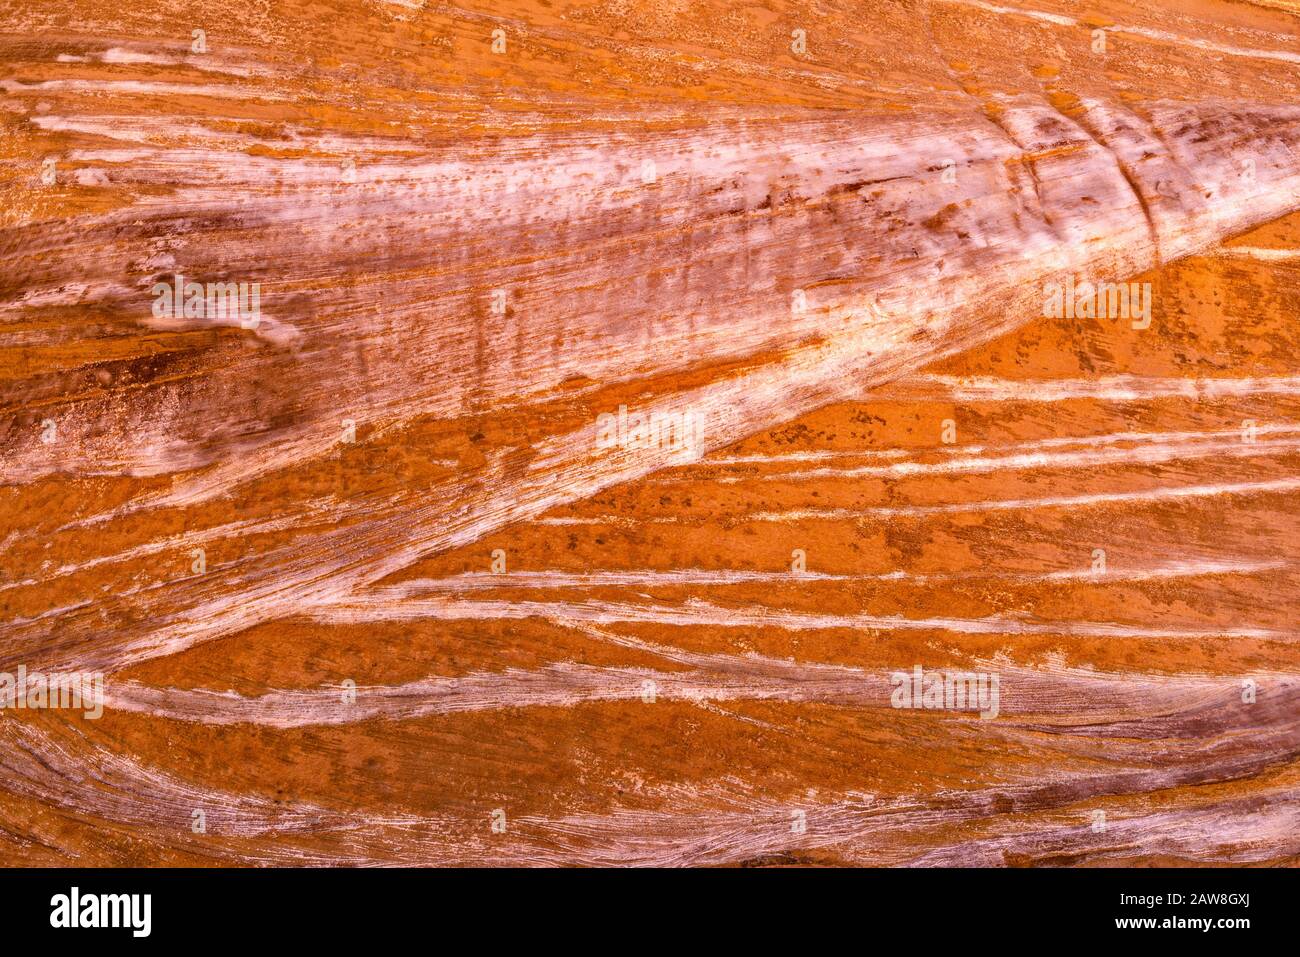 Crossbetting-Technologie an der Felswand der Capitol Gorge, Canyon im Capitol Reef National Park, Colorado Plateau, Utah, USA Stockfoto